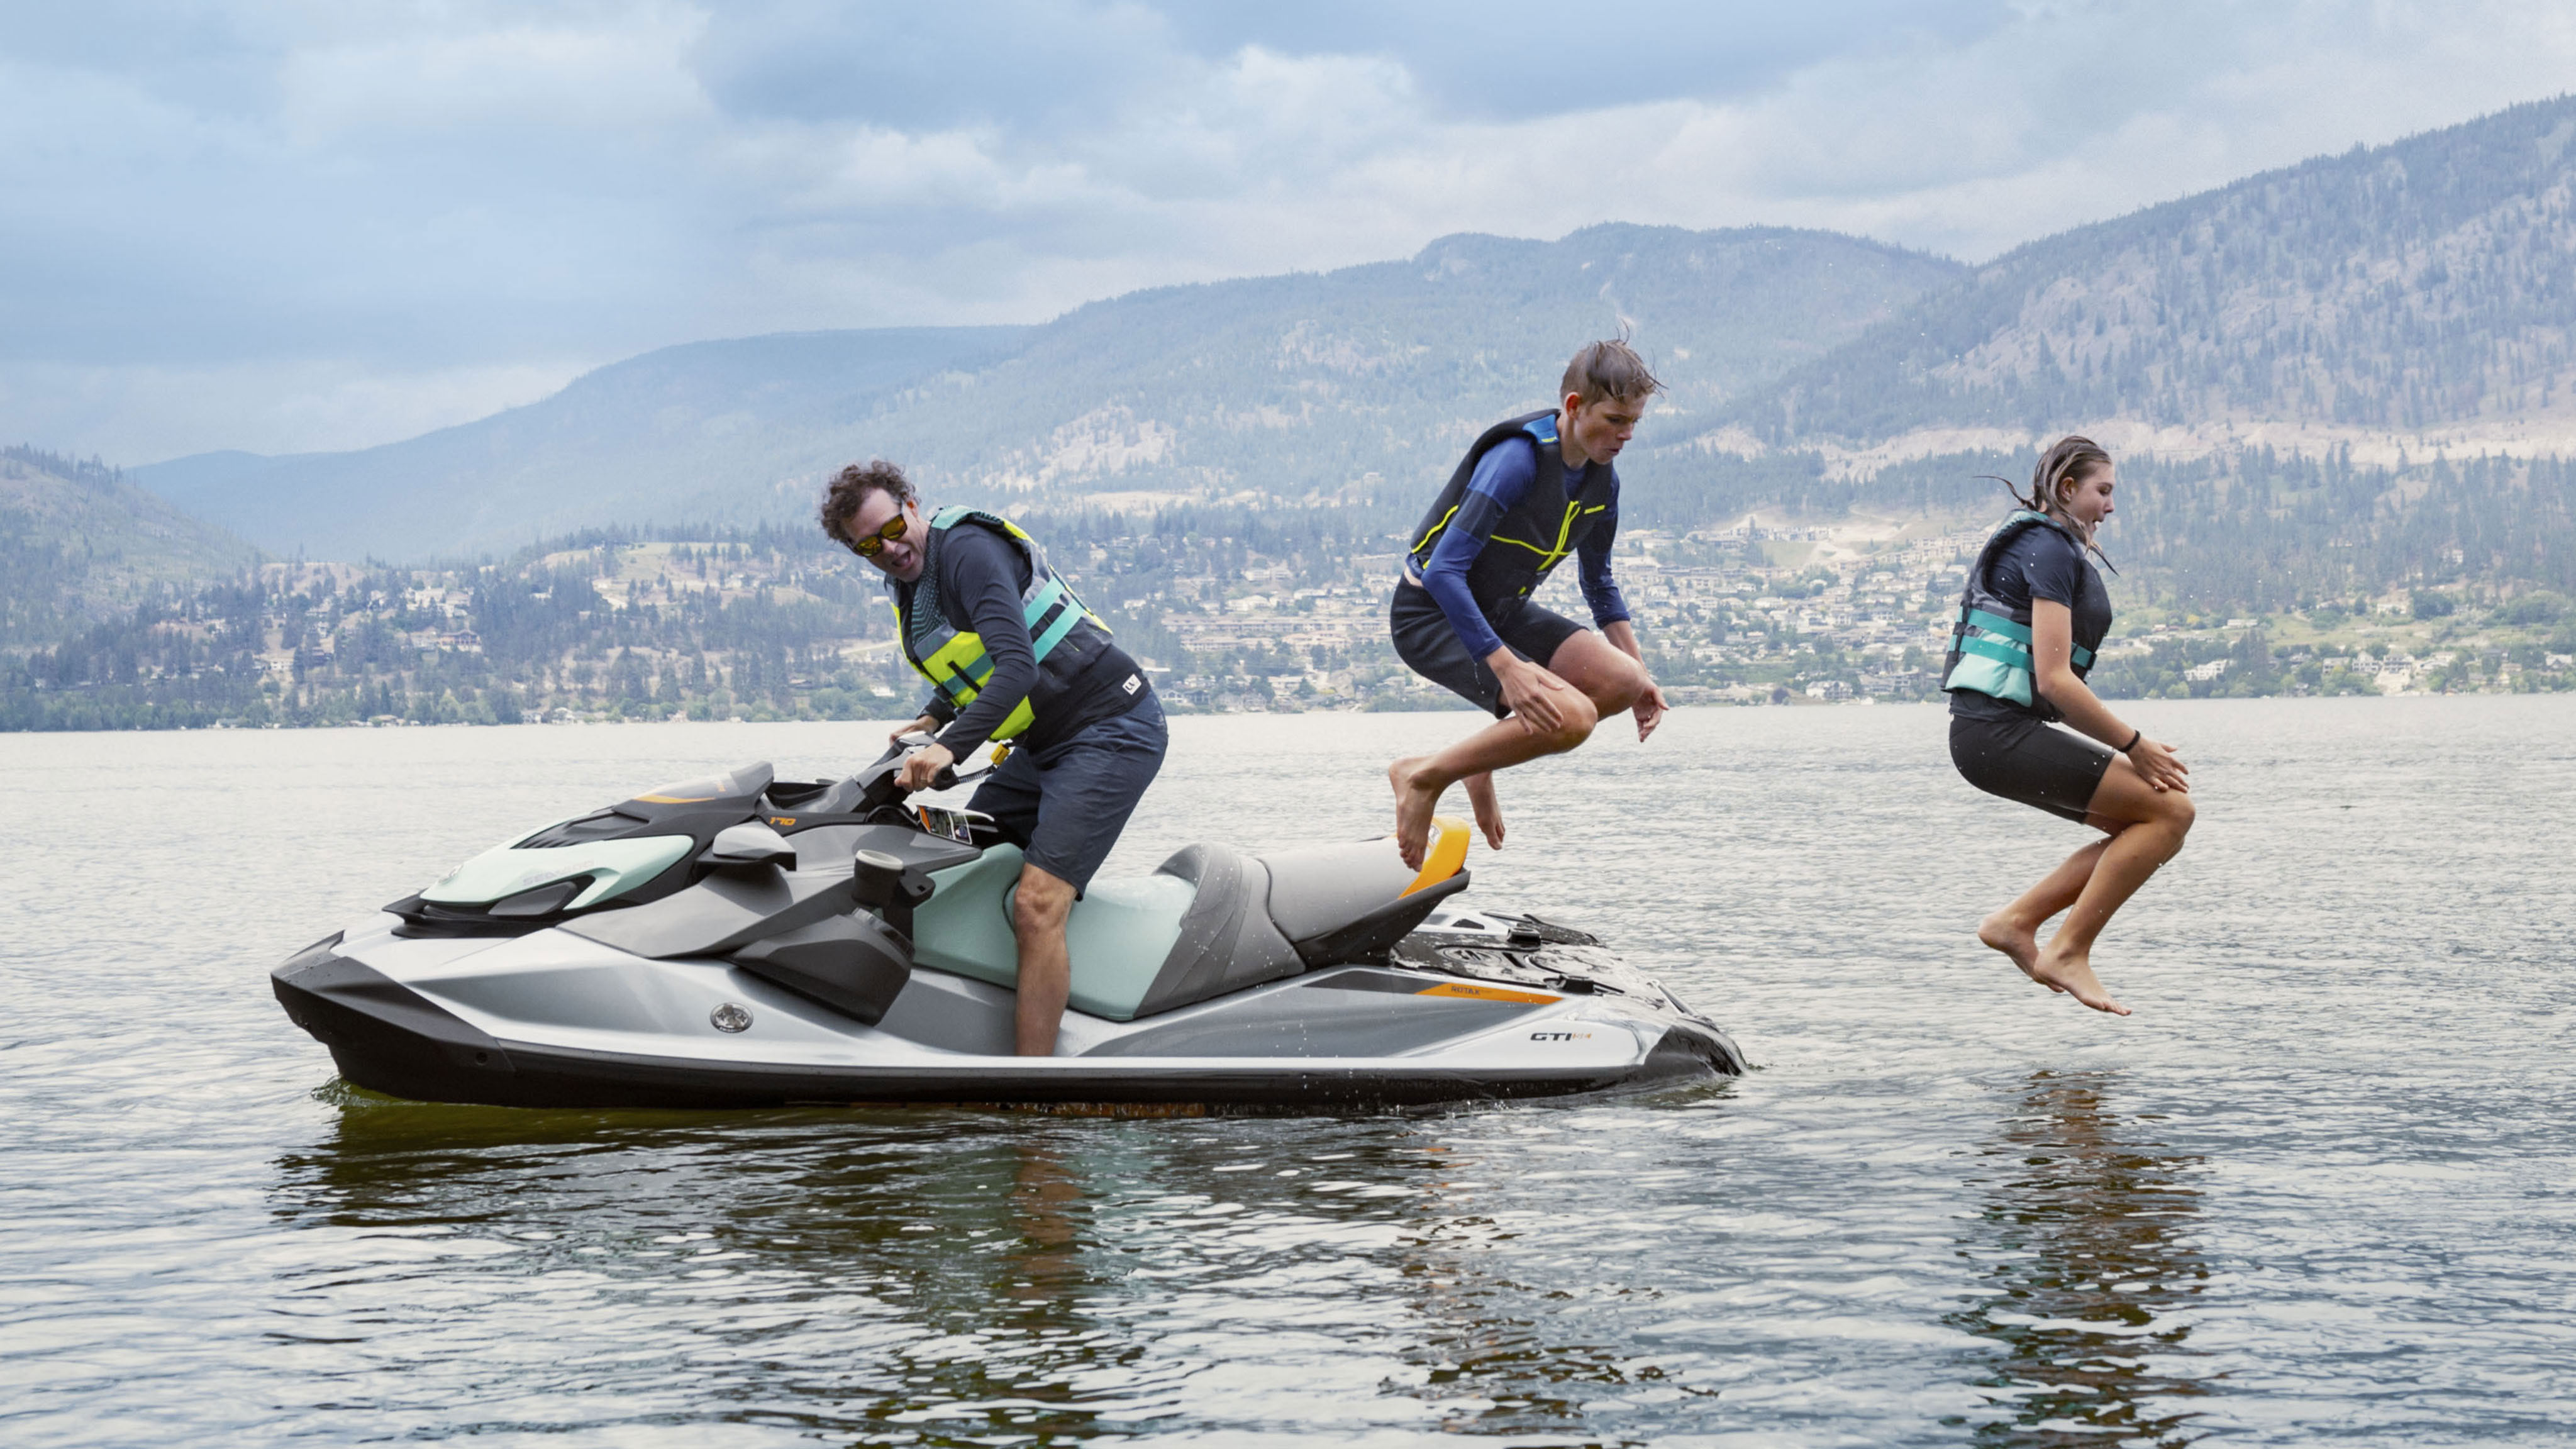 A dad on a Sea-Doo GTI while his two kids are jumping in the water